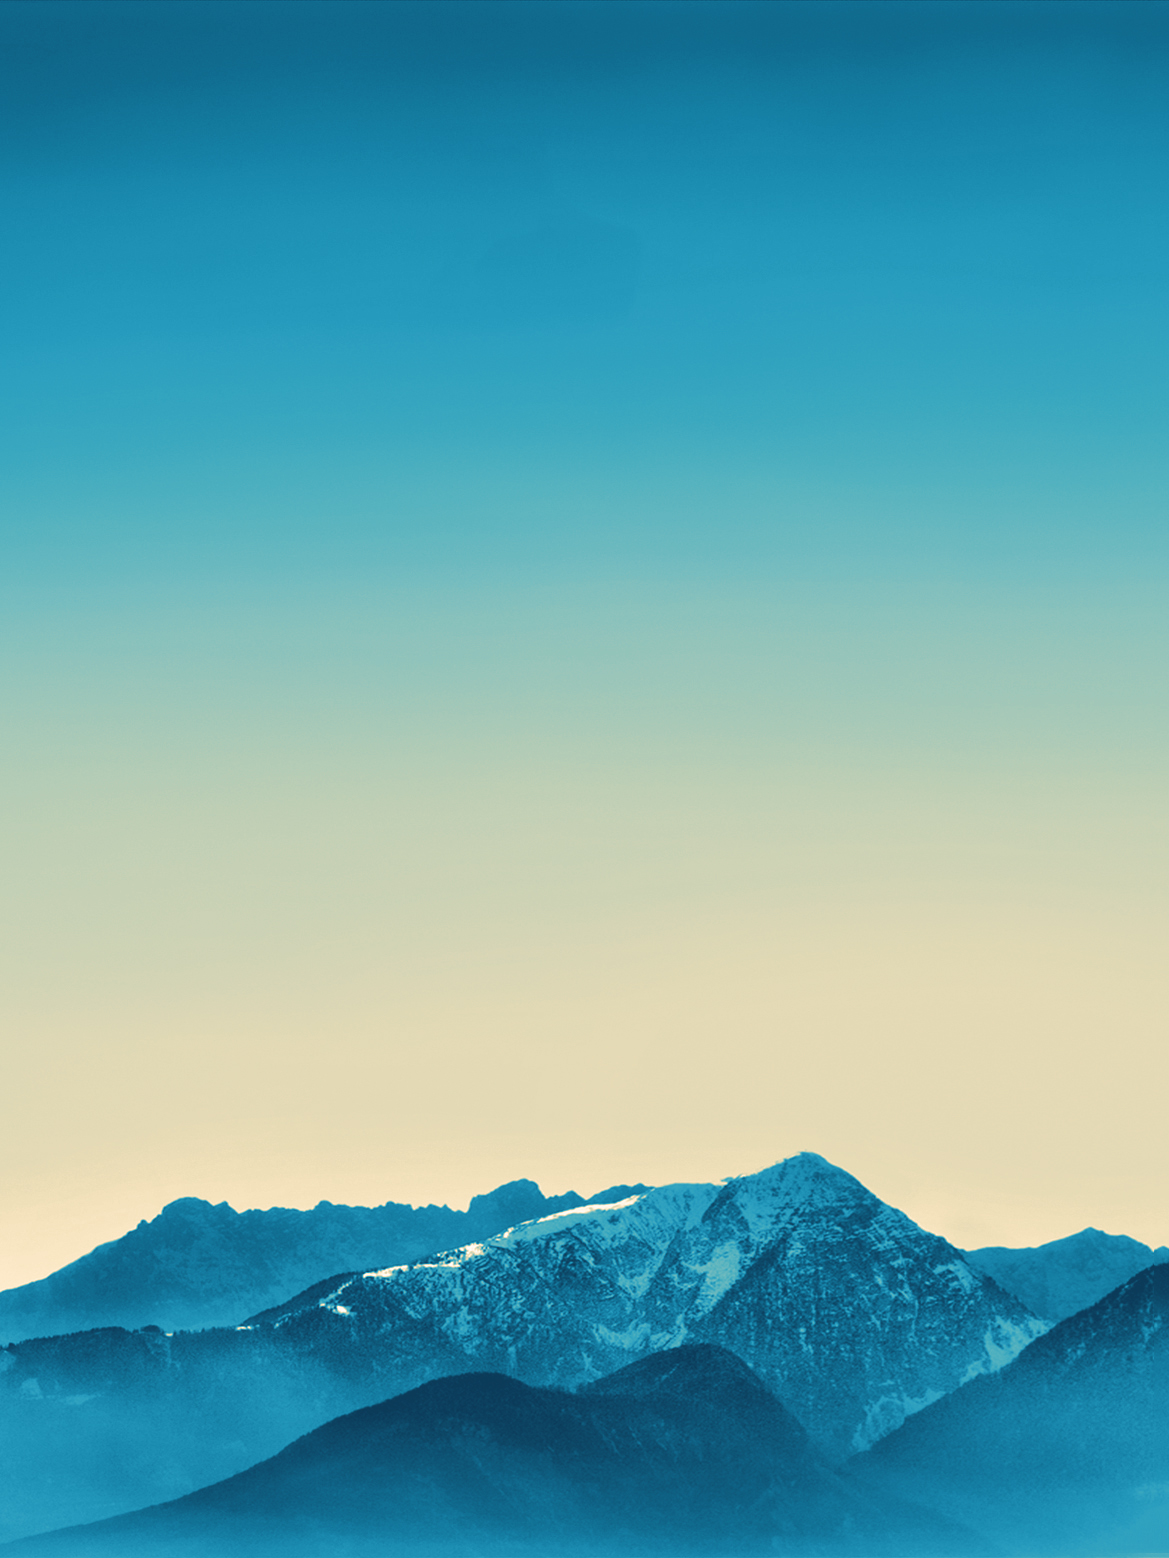 The Two Enigmatically Missing iPad Air 2 Mountain Wallpapers | OSXDaily